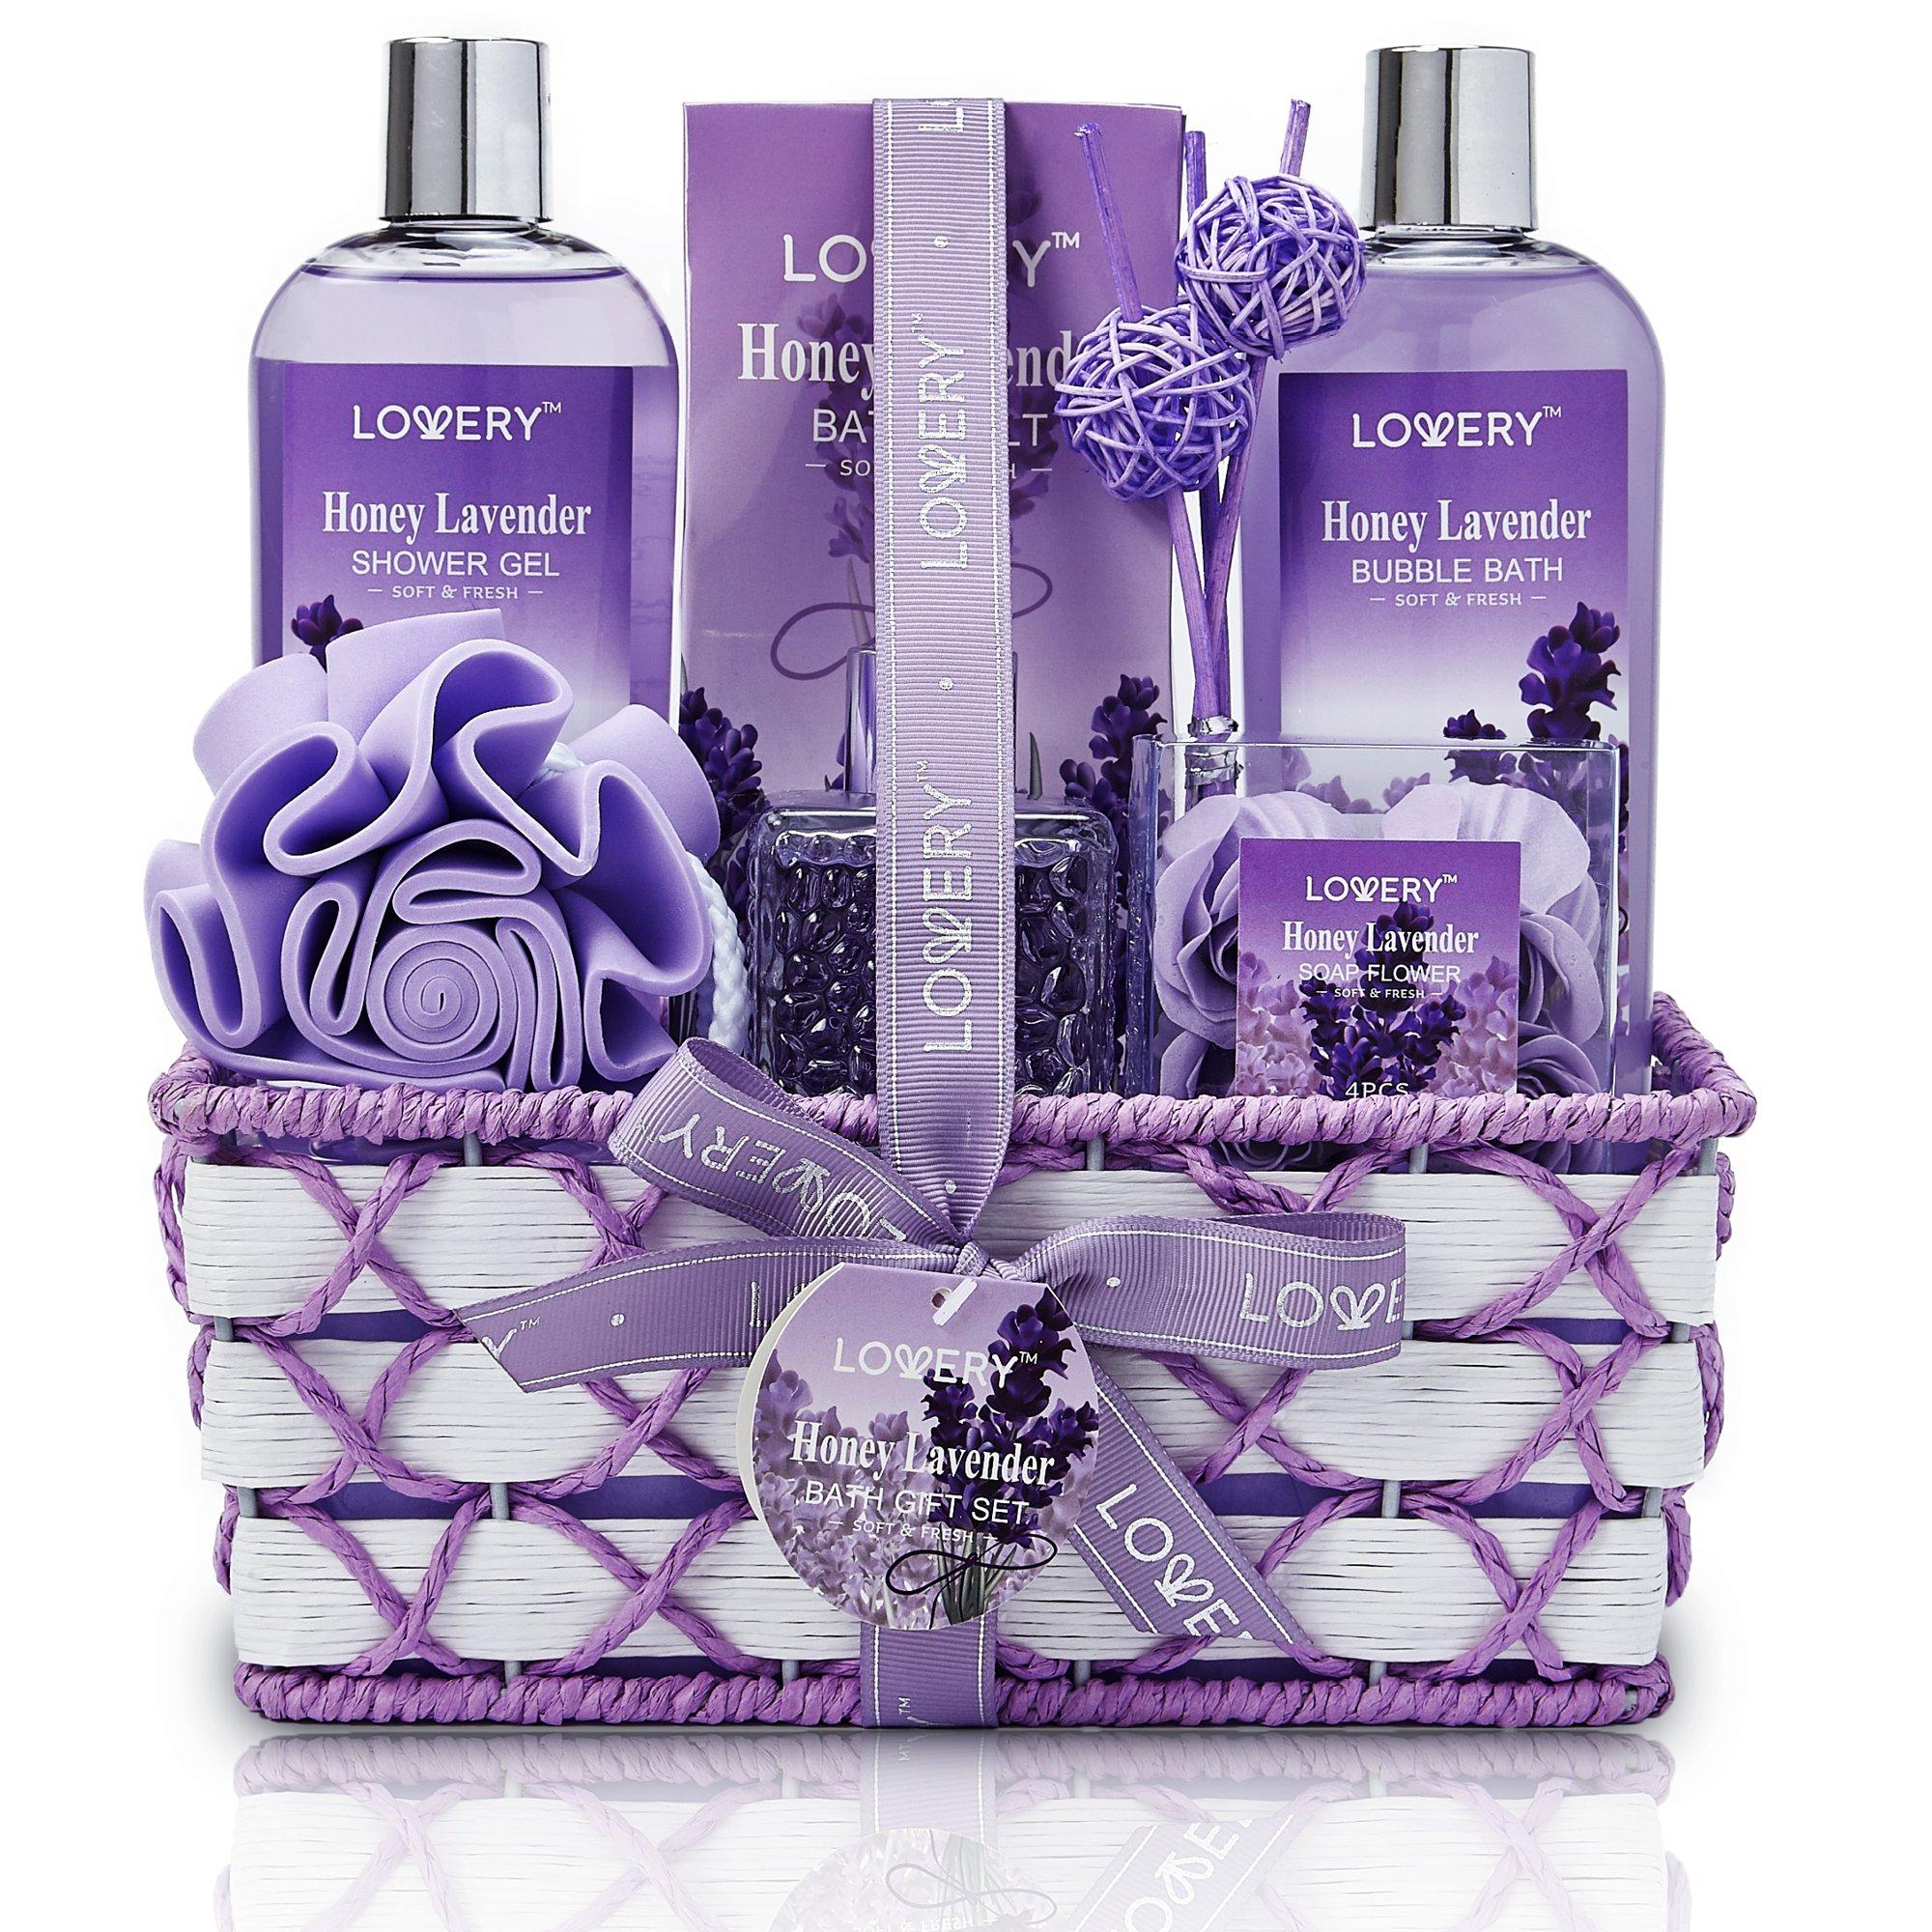 Birthday Gifts for Women Bath and Body Works Gifts Set for Women Spa Gifts Baskets for Women Bubble Bath for Women Lavender Gifts for